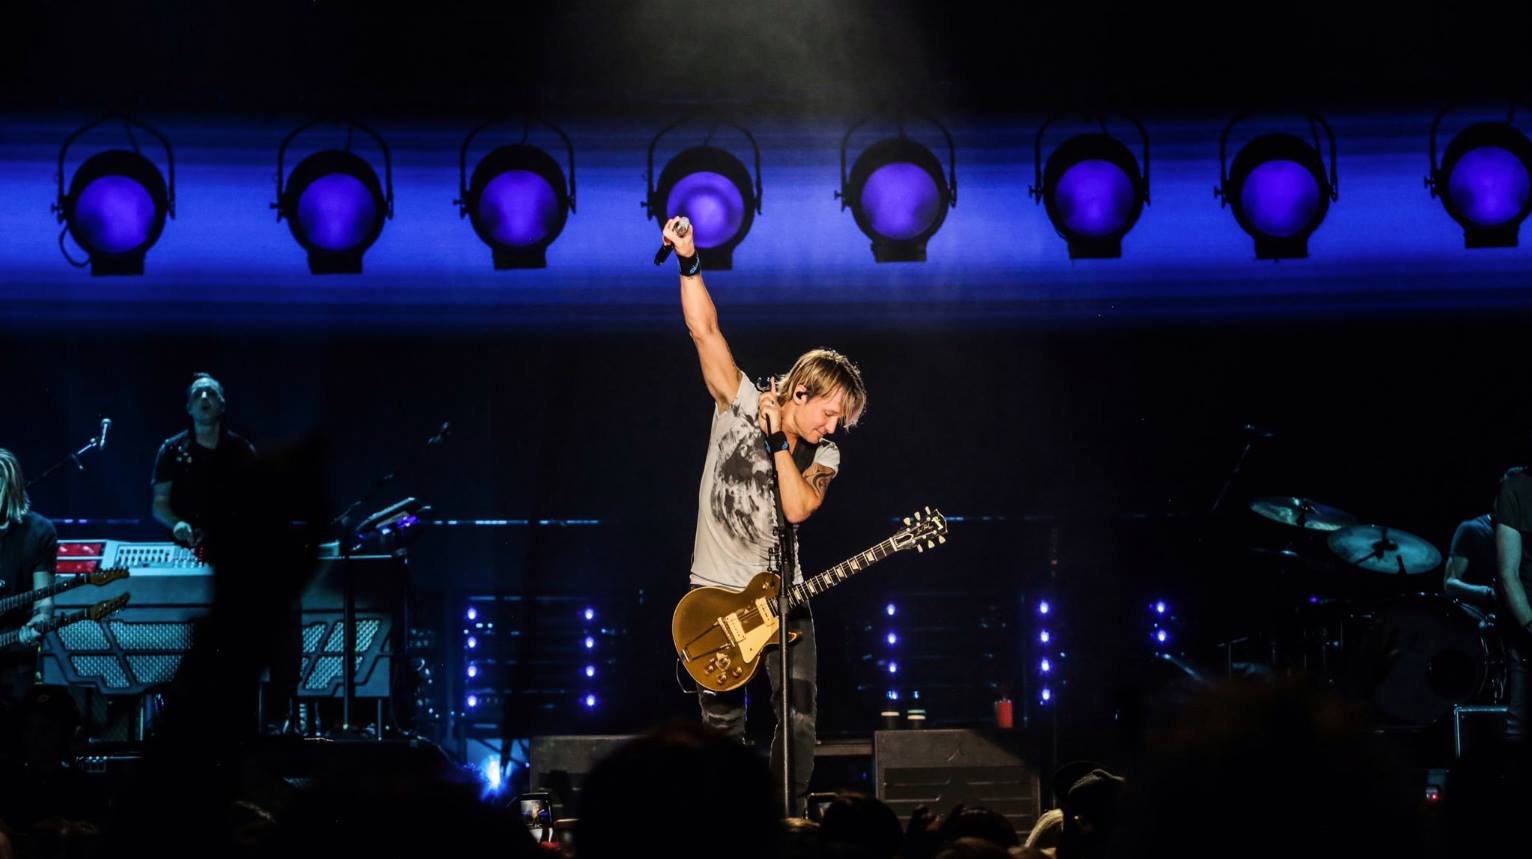 Keith Urban Delivers a Star Studded Show in Nashville During GRAFFITI U World Tour